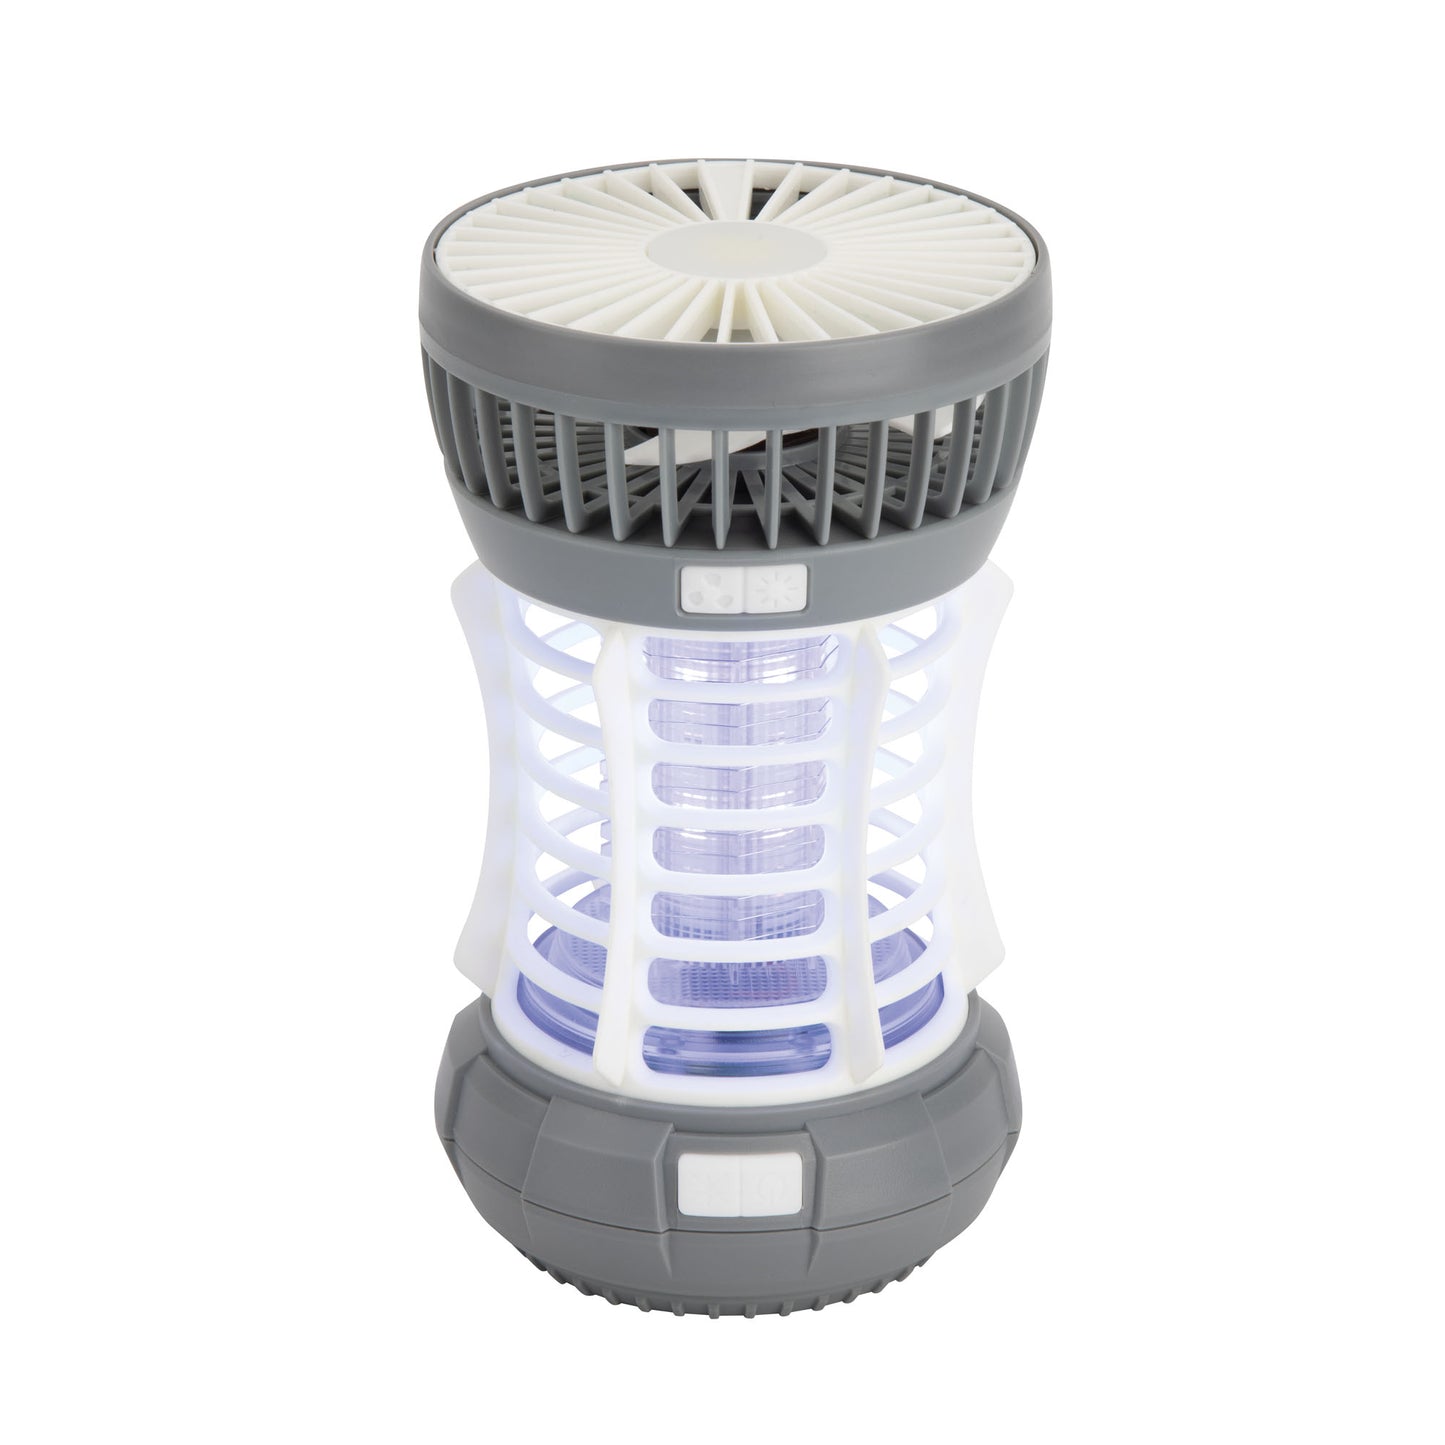 Insect killer/lamp Jata MOST3532 5-in-one